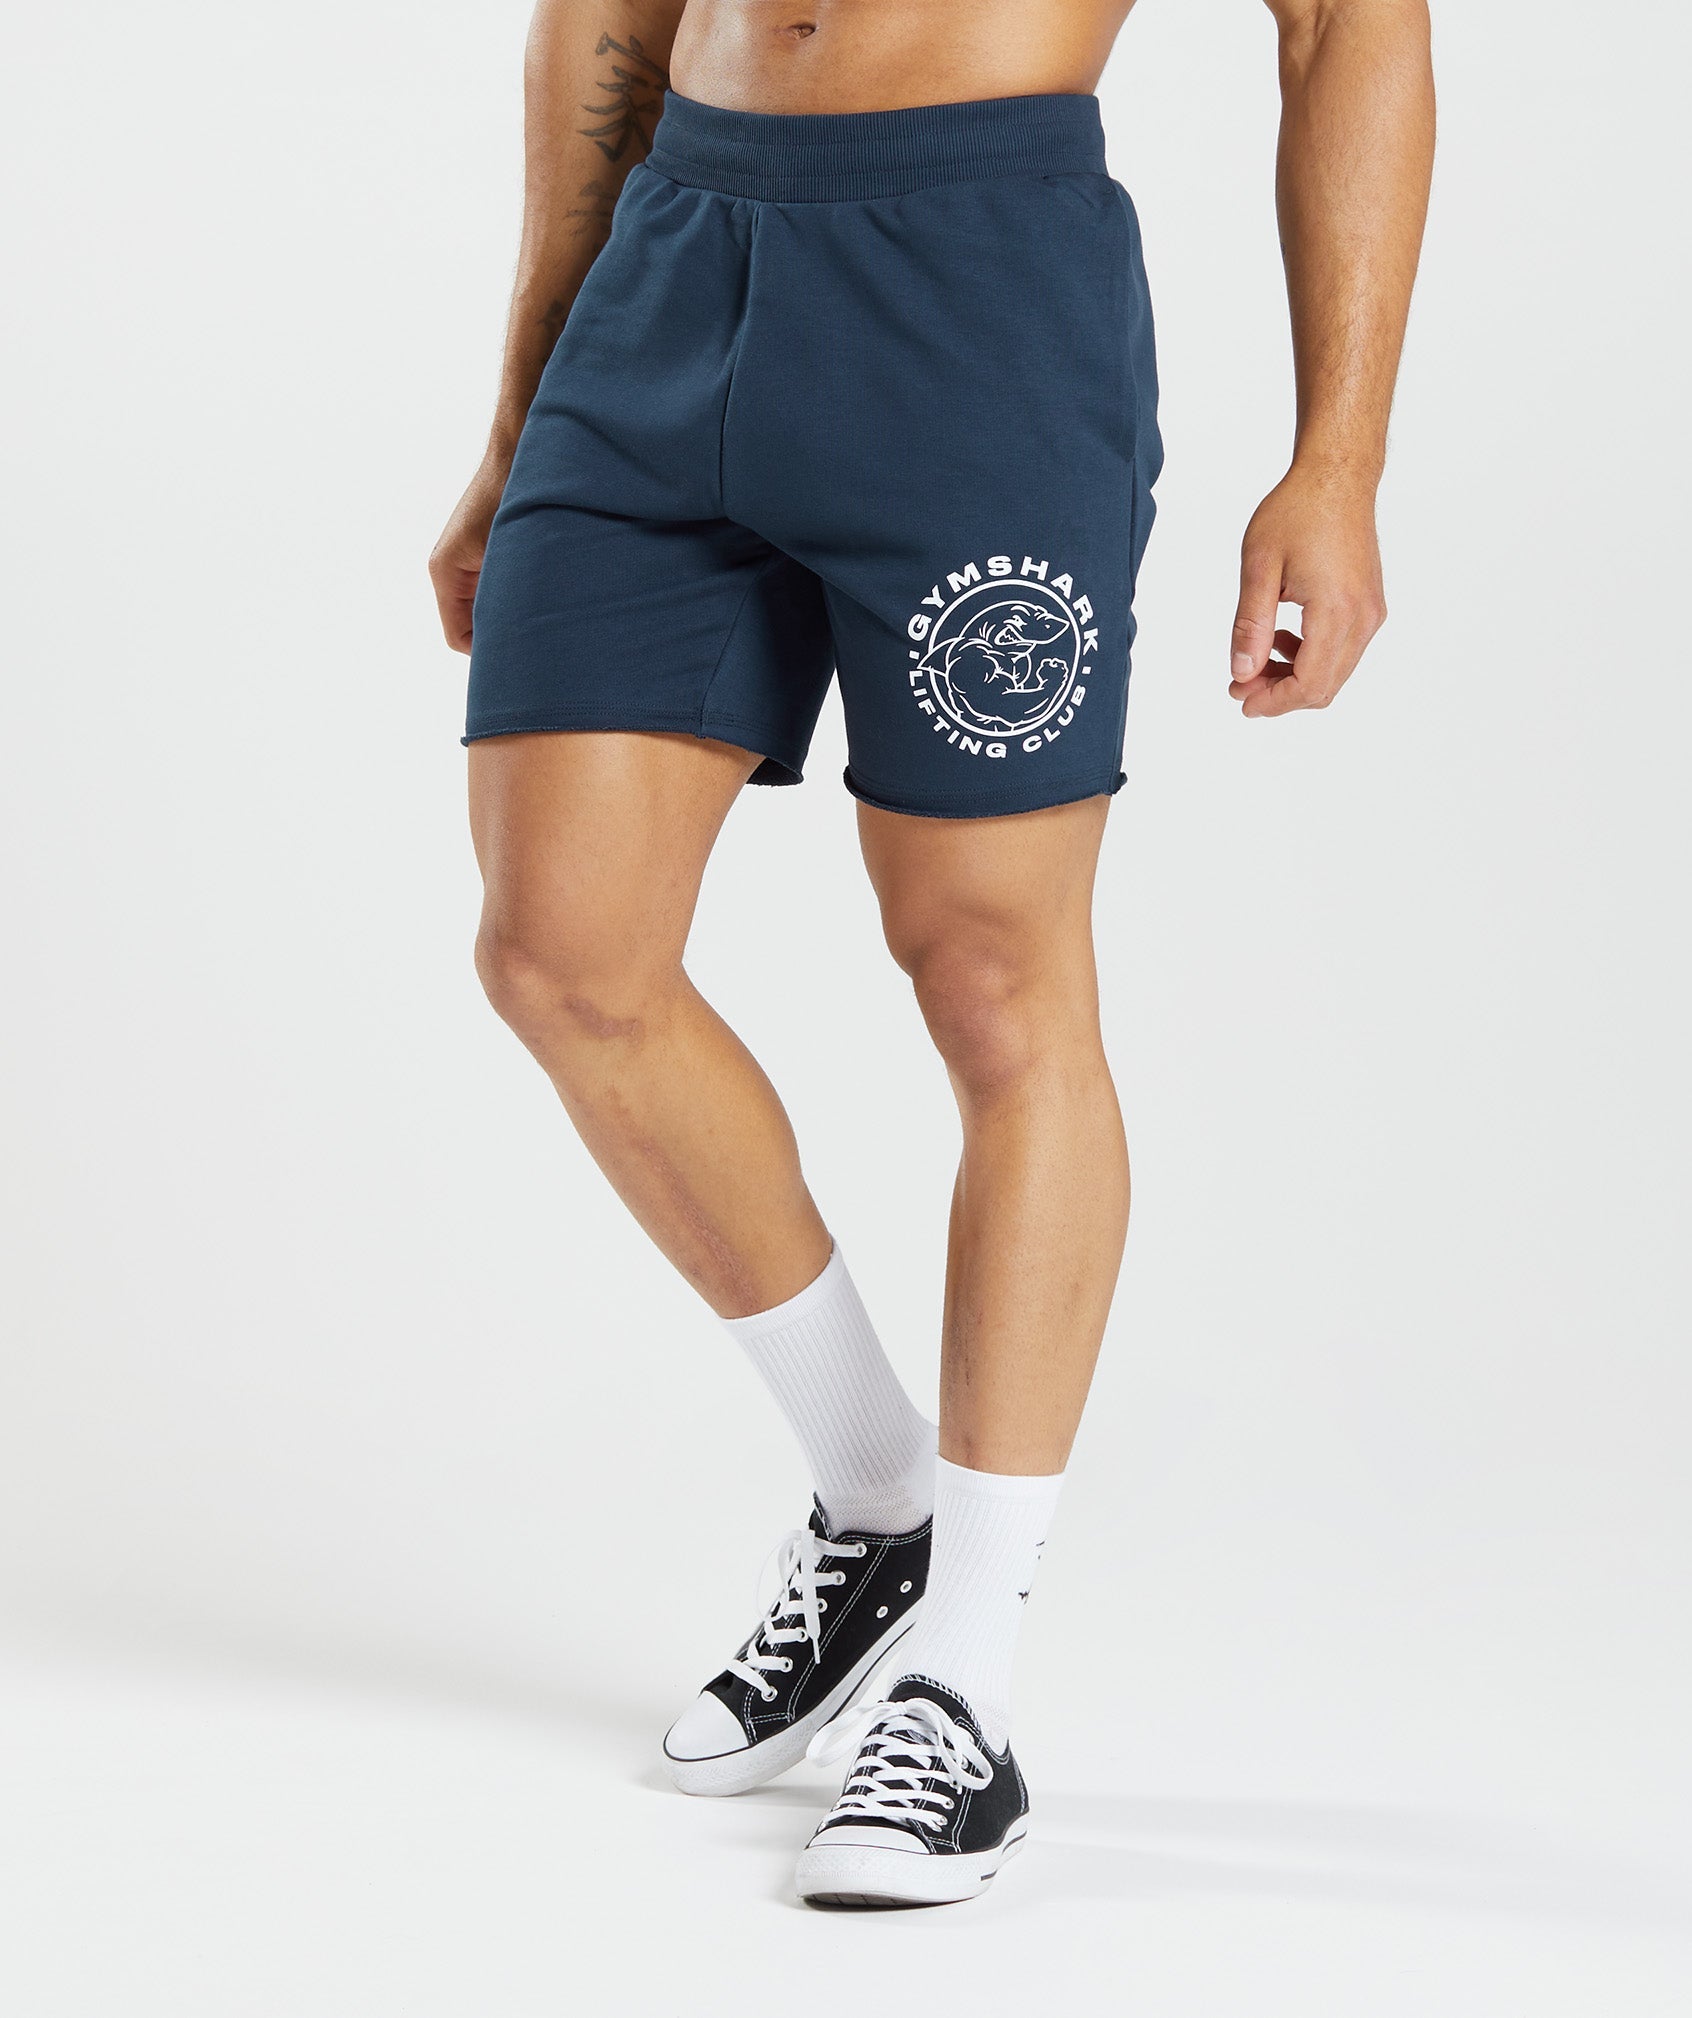 Legacy Shorts in Navy - view 1